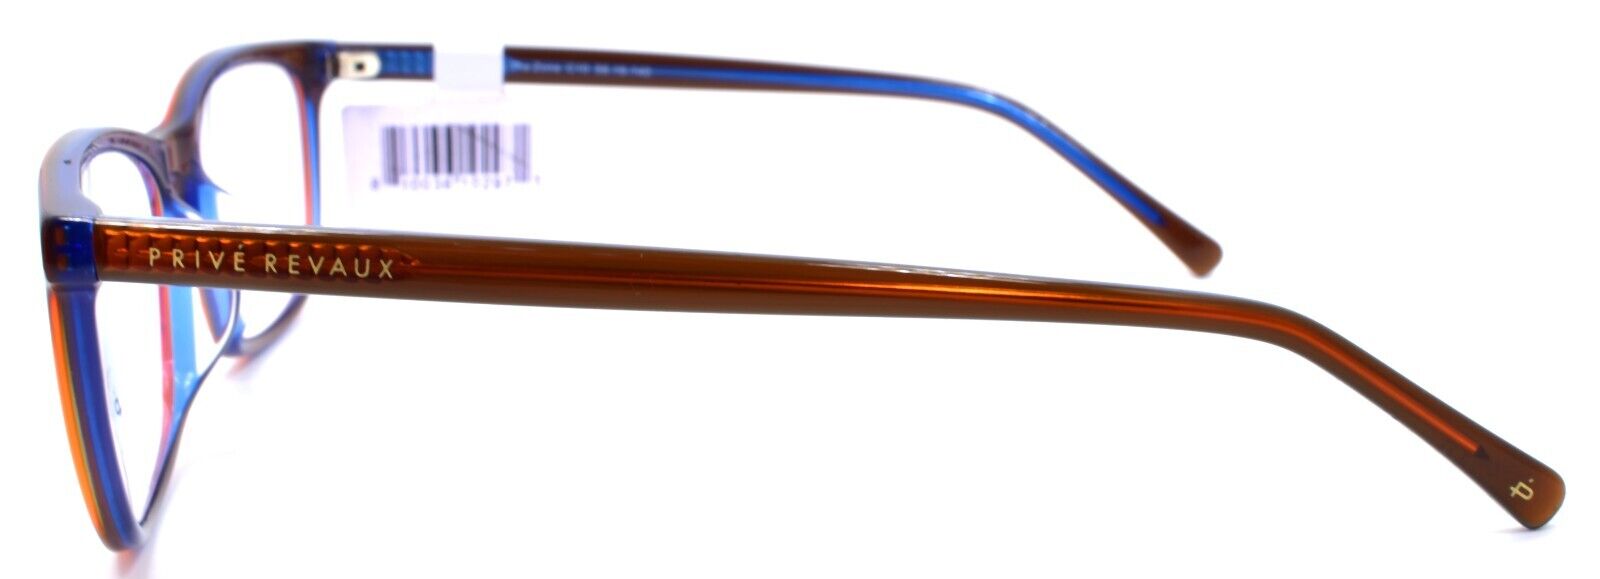 3-Prive Revaux In The Zone Eyeglasses Blue Light Blocking RX-ready Brown / Blue-810036102971-IKSpecs